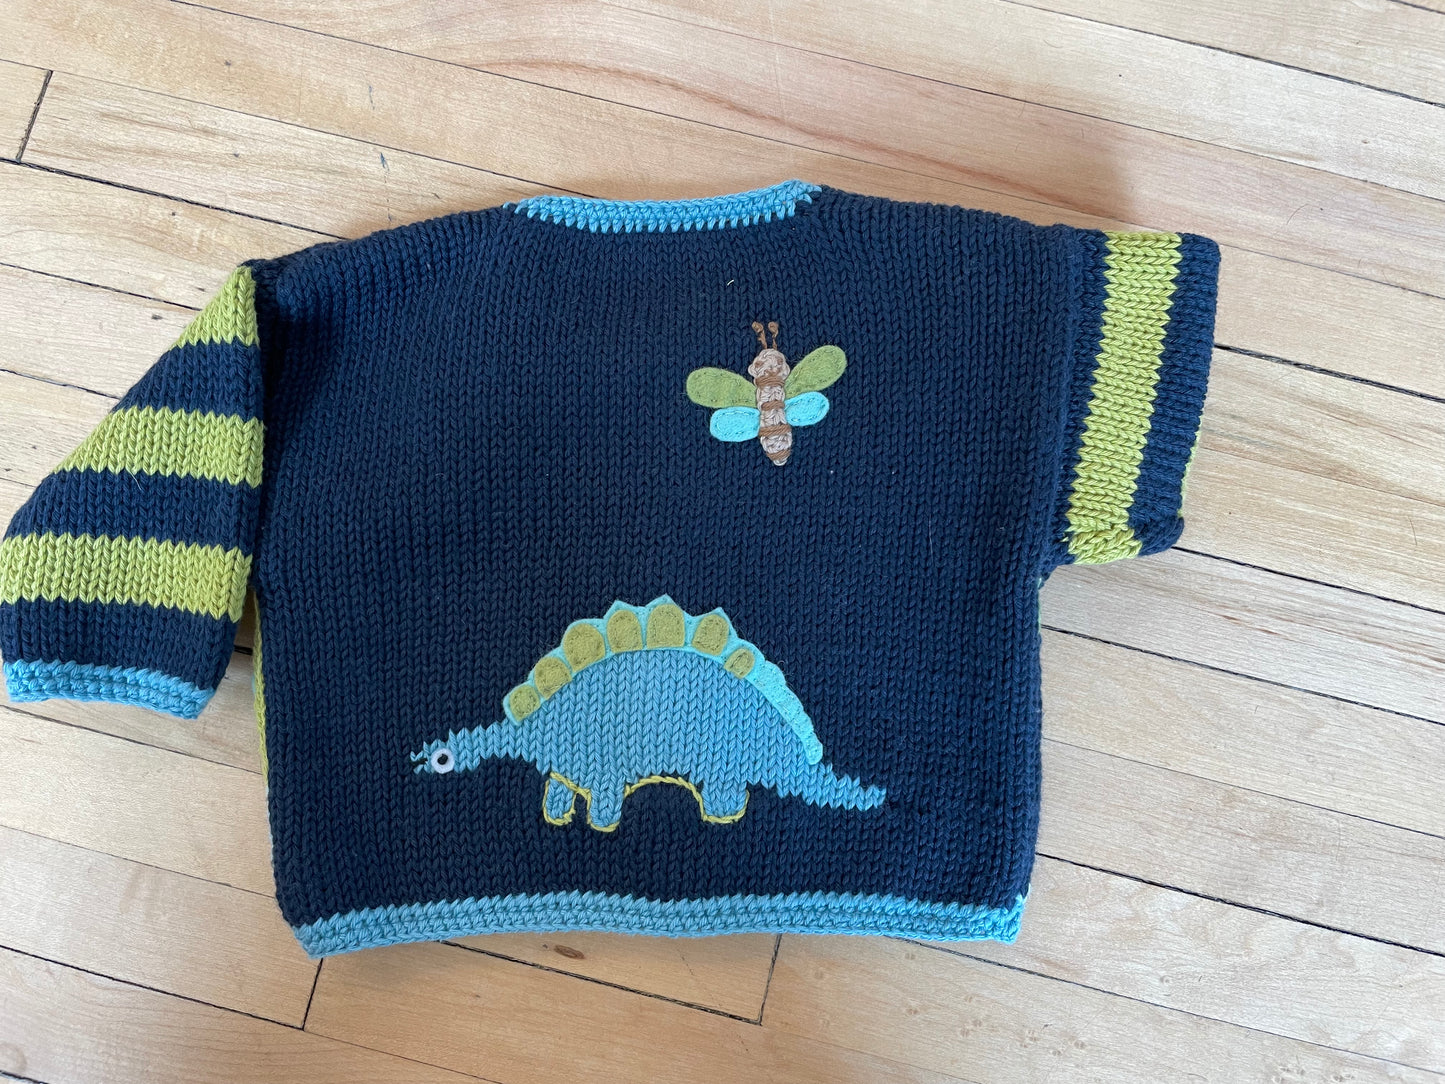 Land of the Lost Knit Sweater